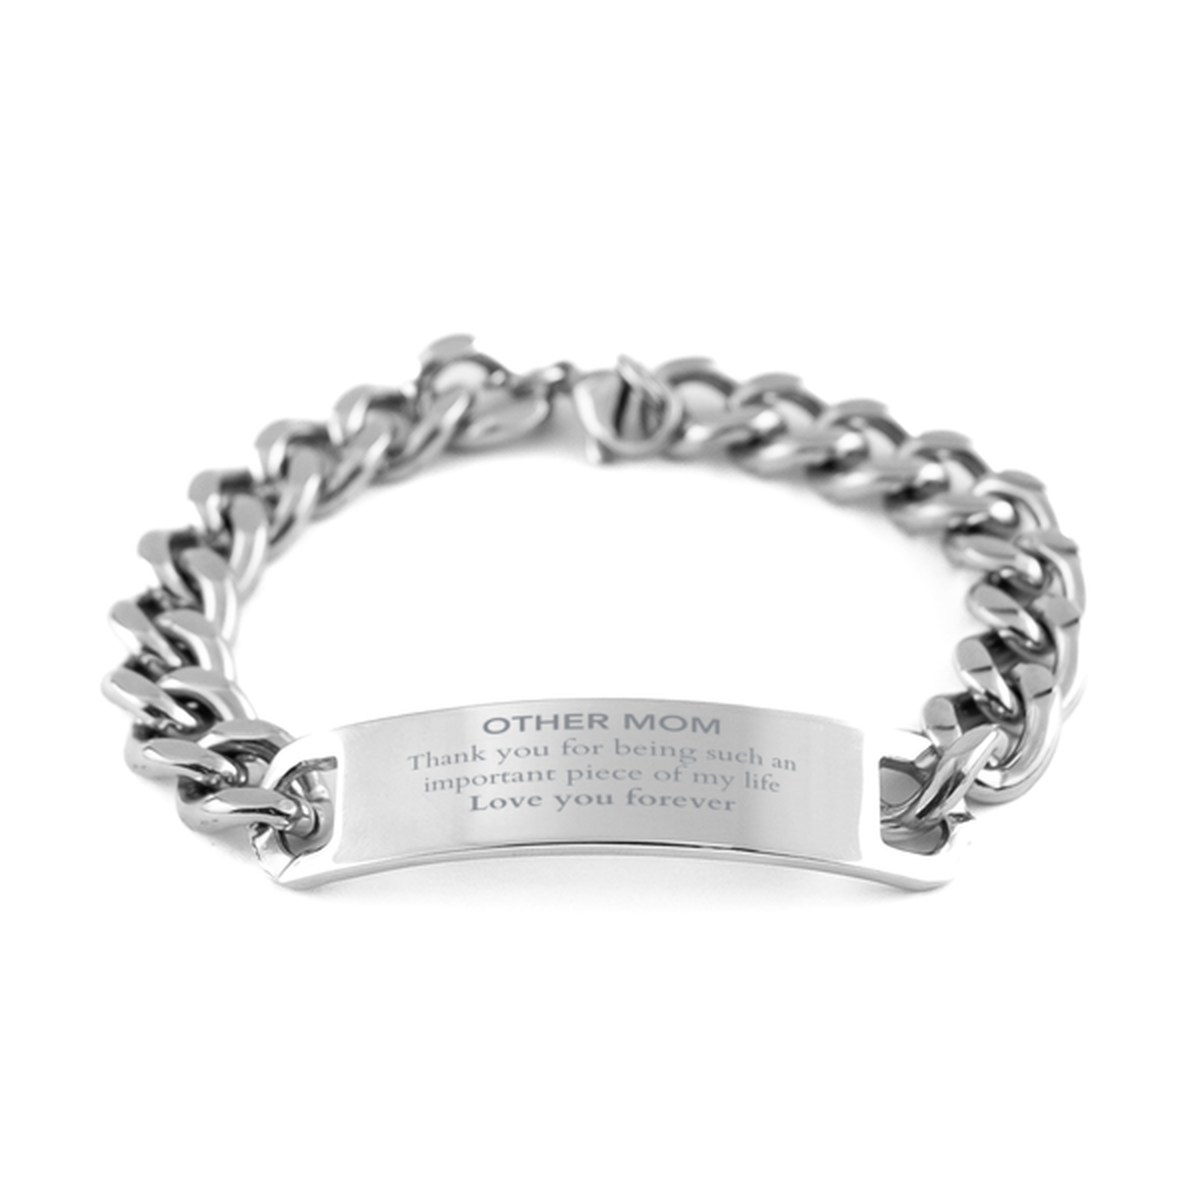 Appropriate Other Mom Cuban Chain Stainless Steel Bracelet Epic Birthday Gifts for Other Mom Thank you for being such an important piece of my life Other Mom Christmas Mothers Fathers Day